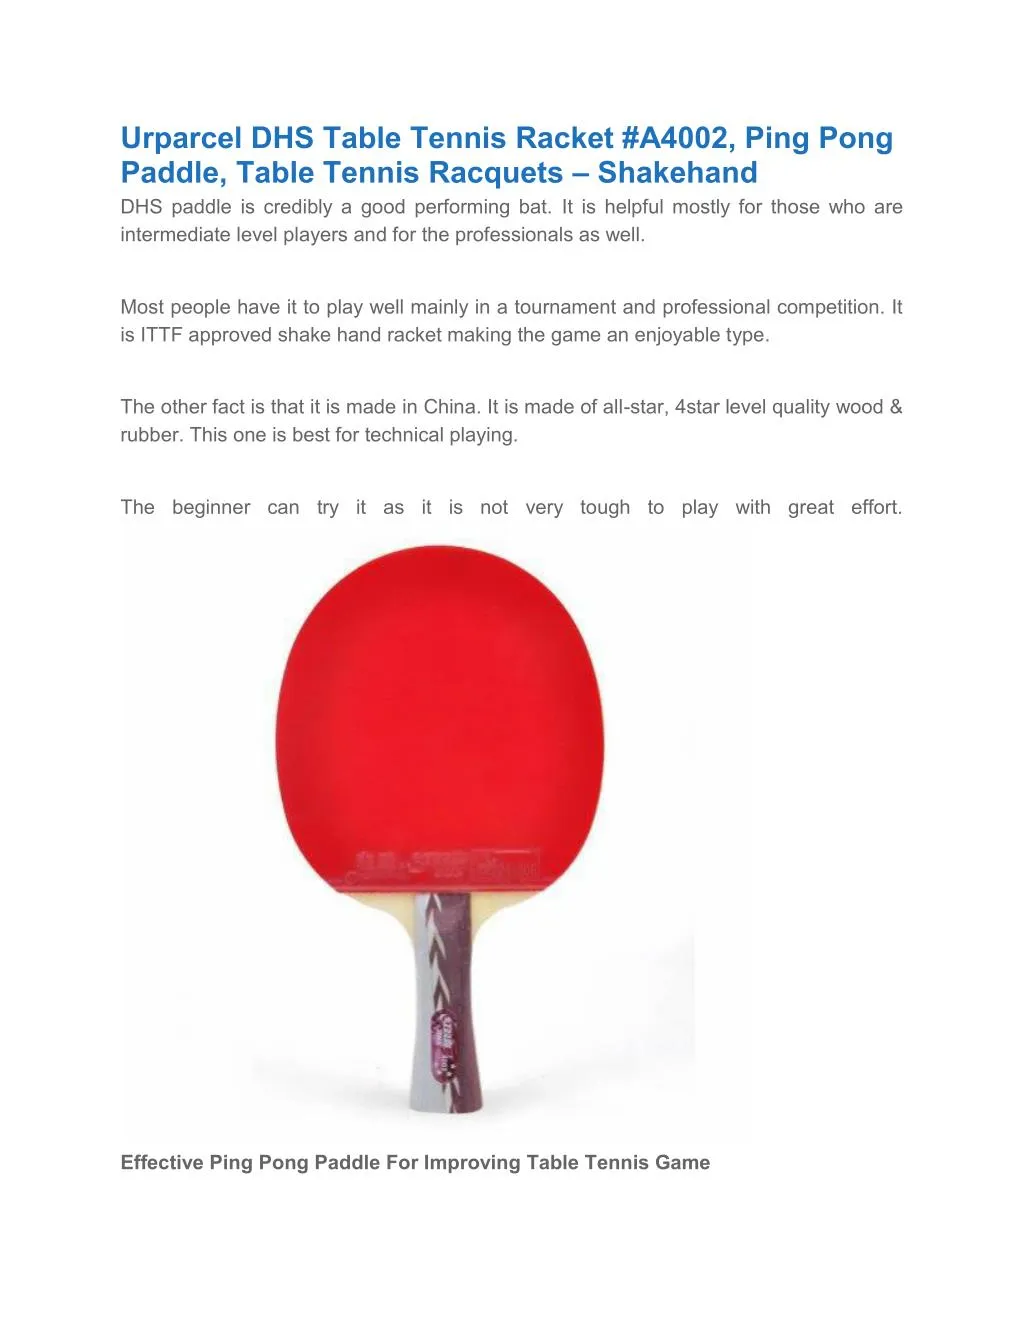 Ppt Urparcel Dhs Table Tennis Racket Powerpoint Presentation Free Download Id 7582651